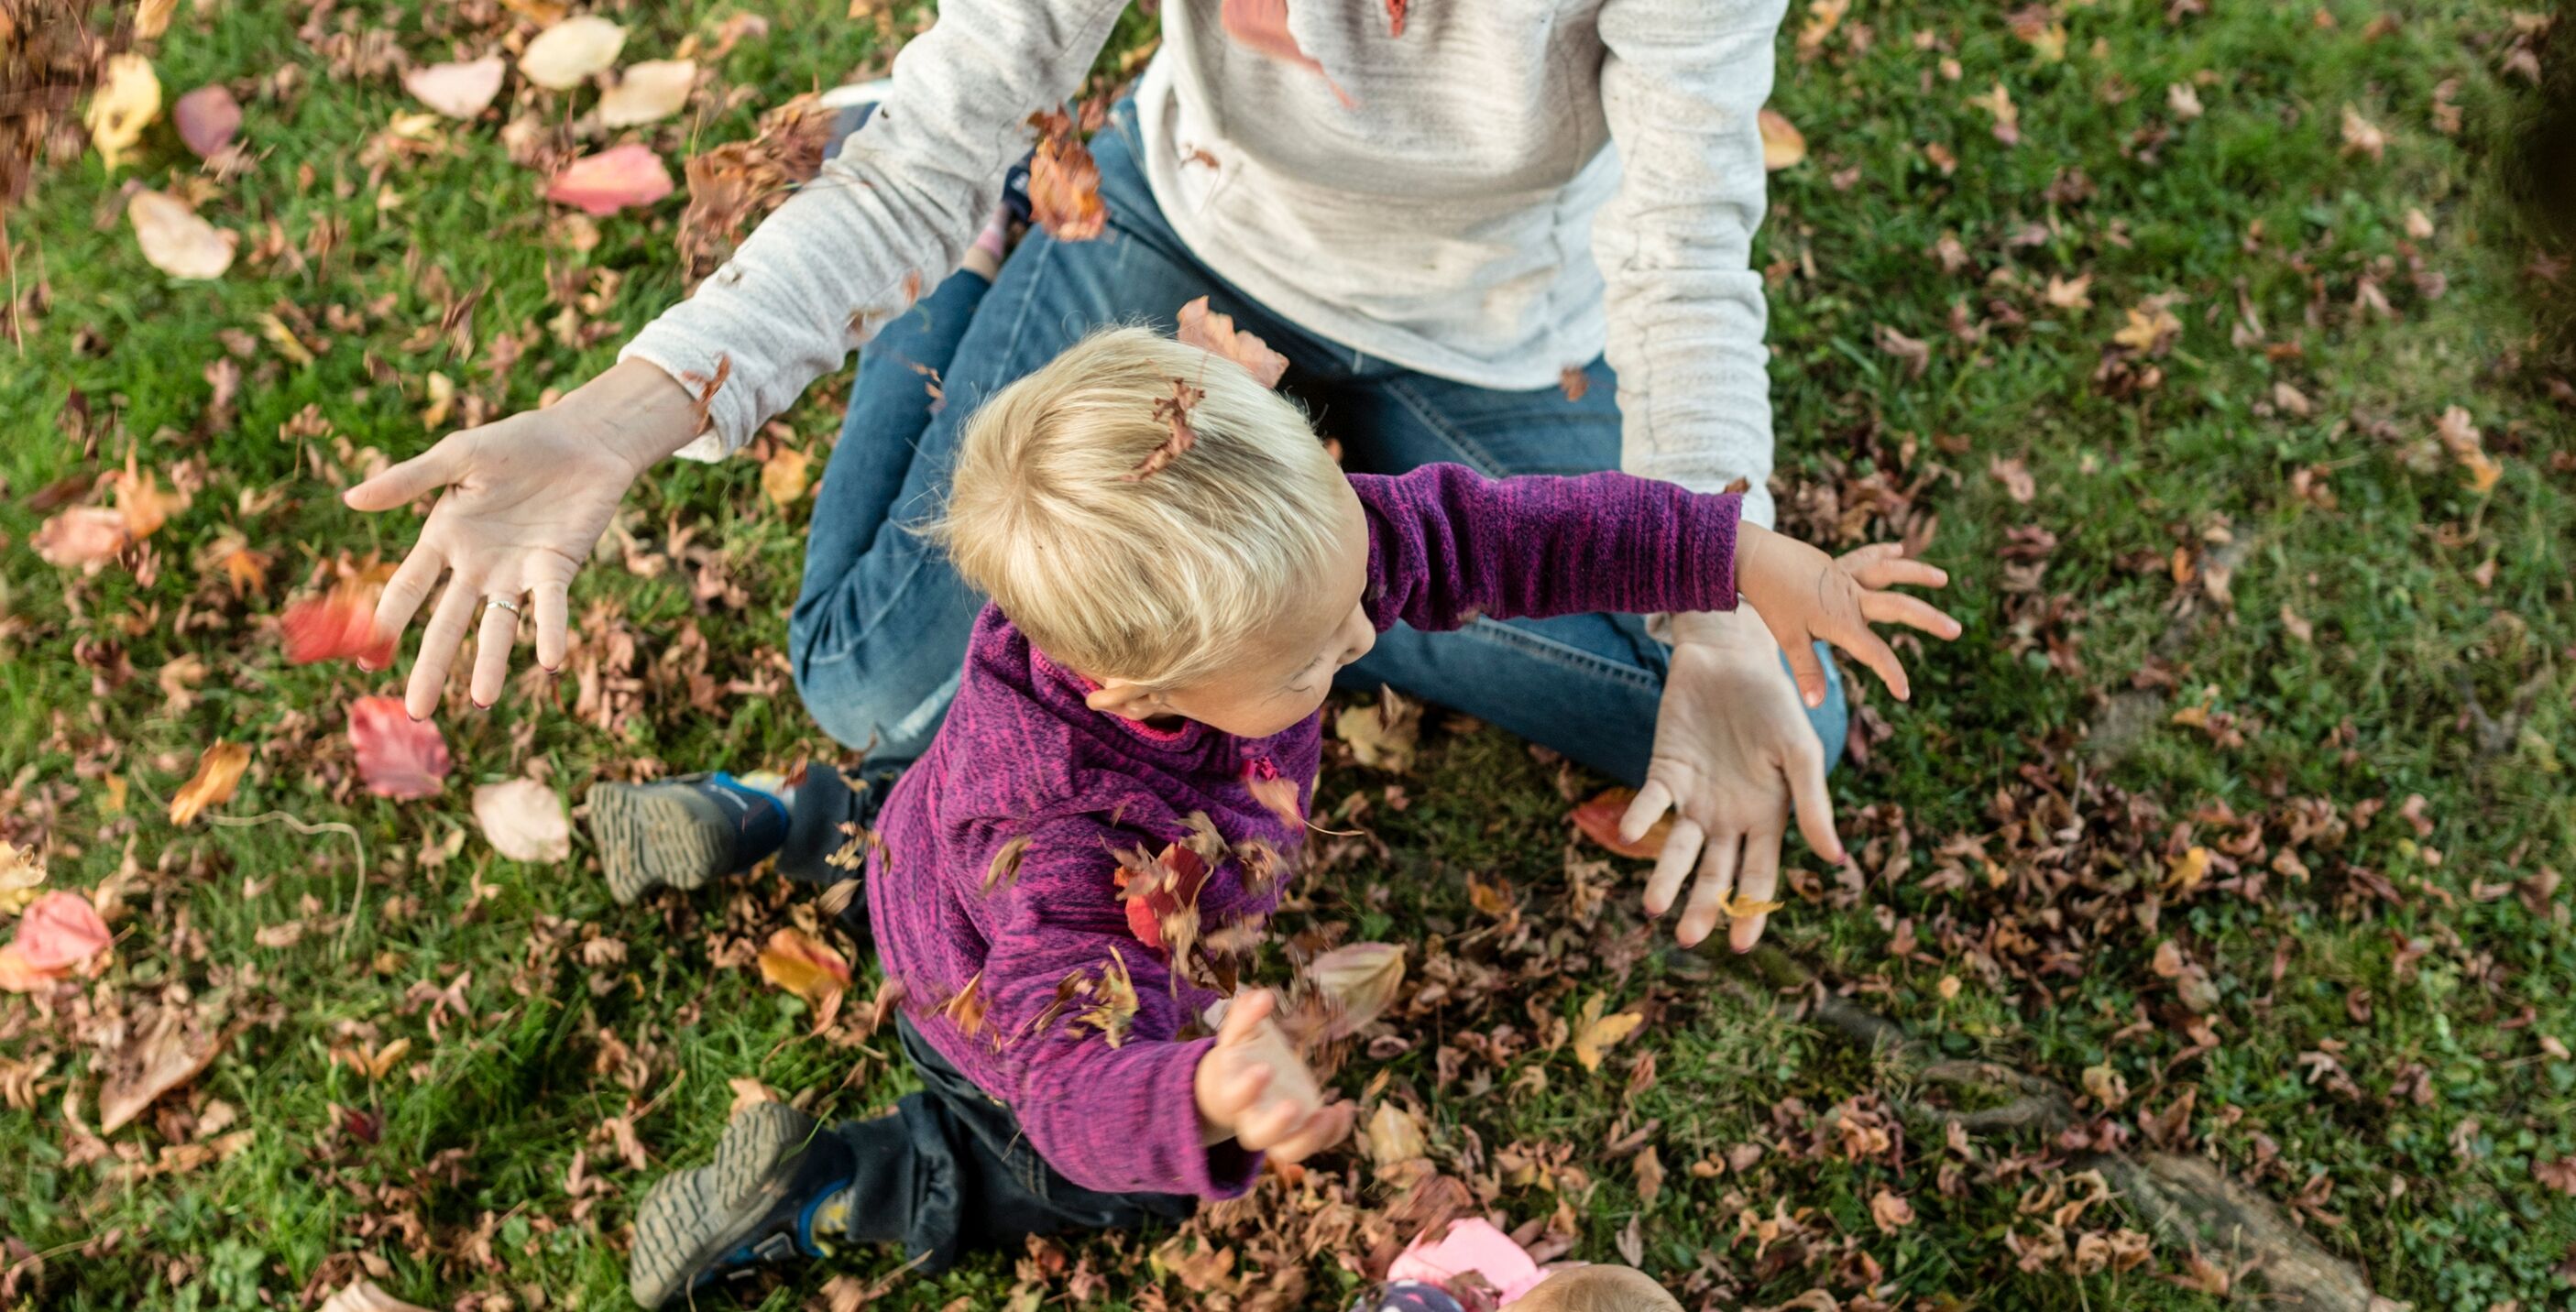 Woman playing with children on grass